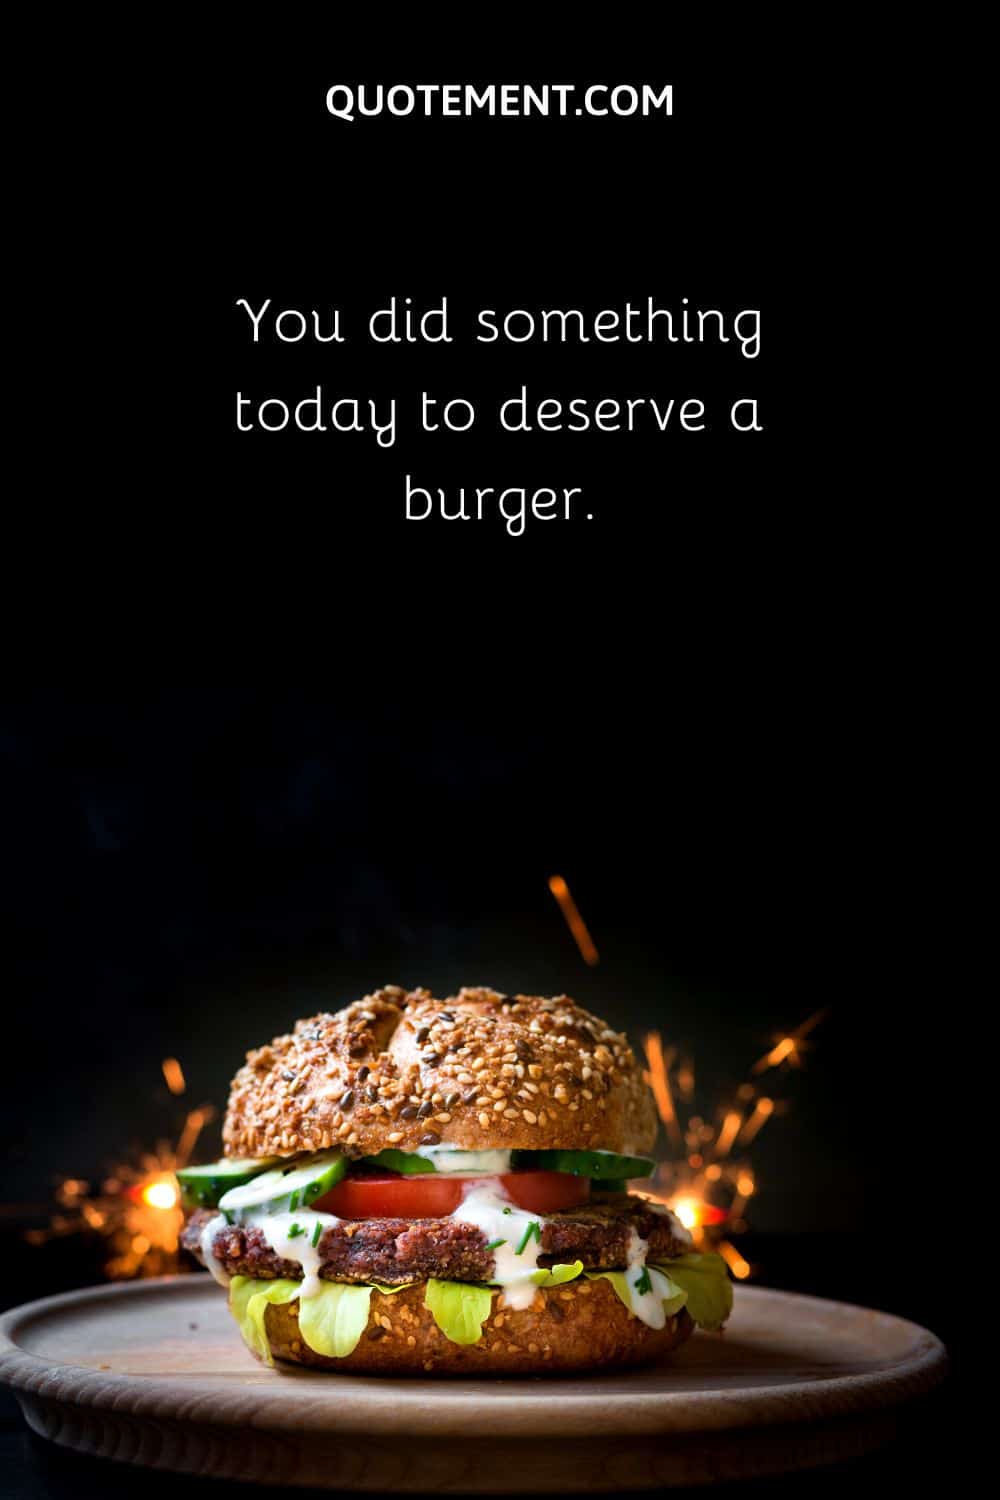 You did something today to deserve a burger.